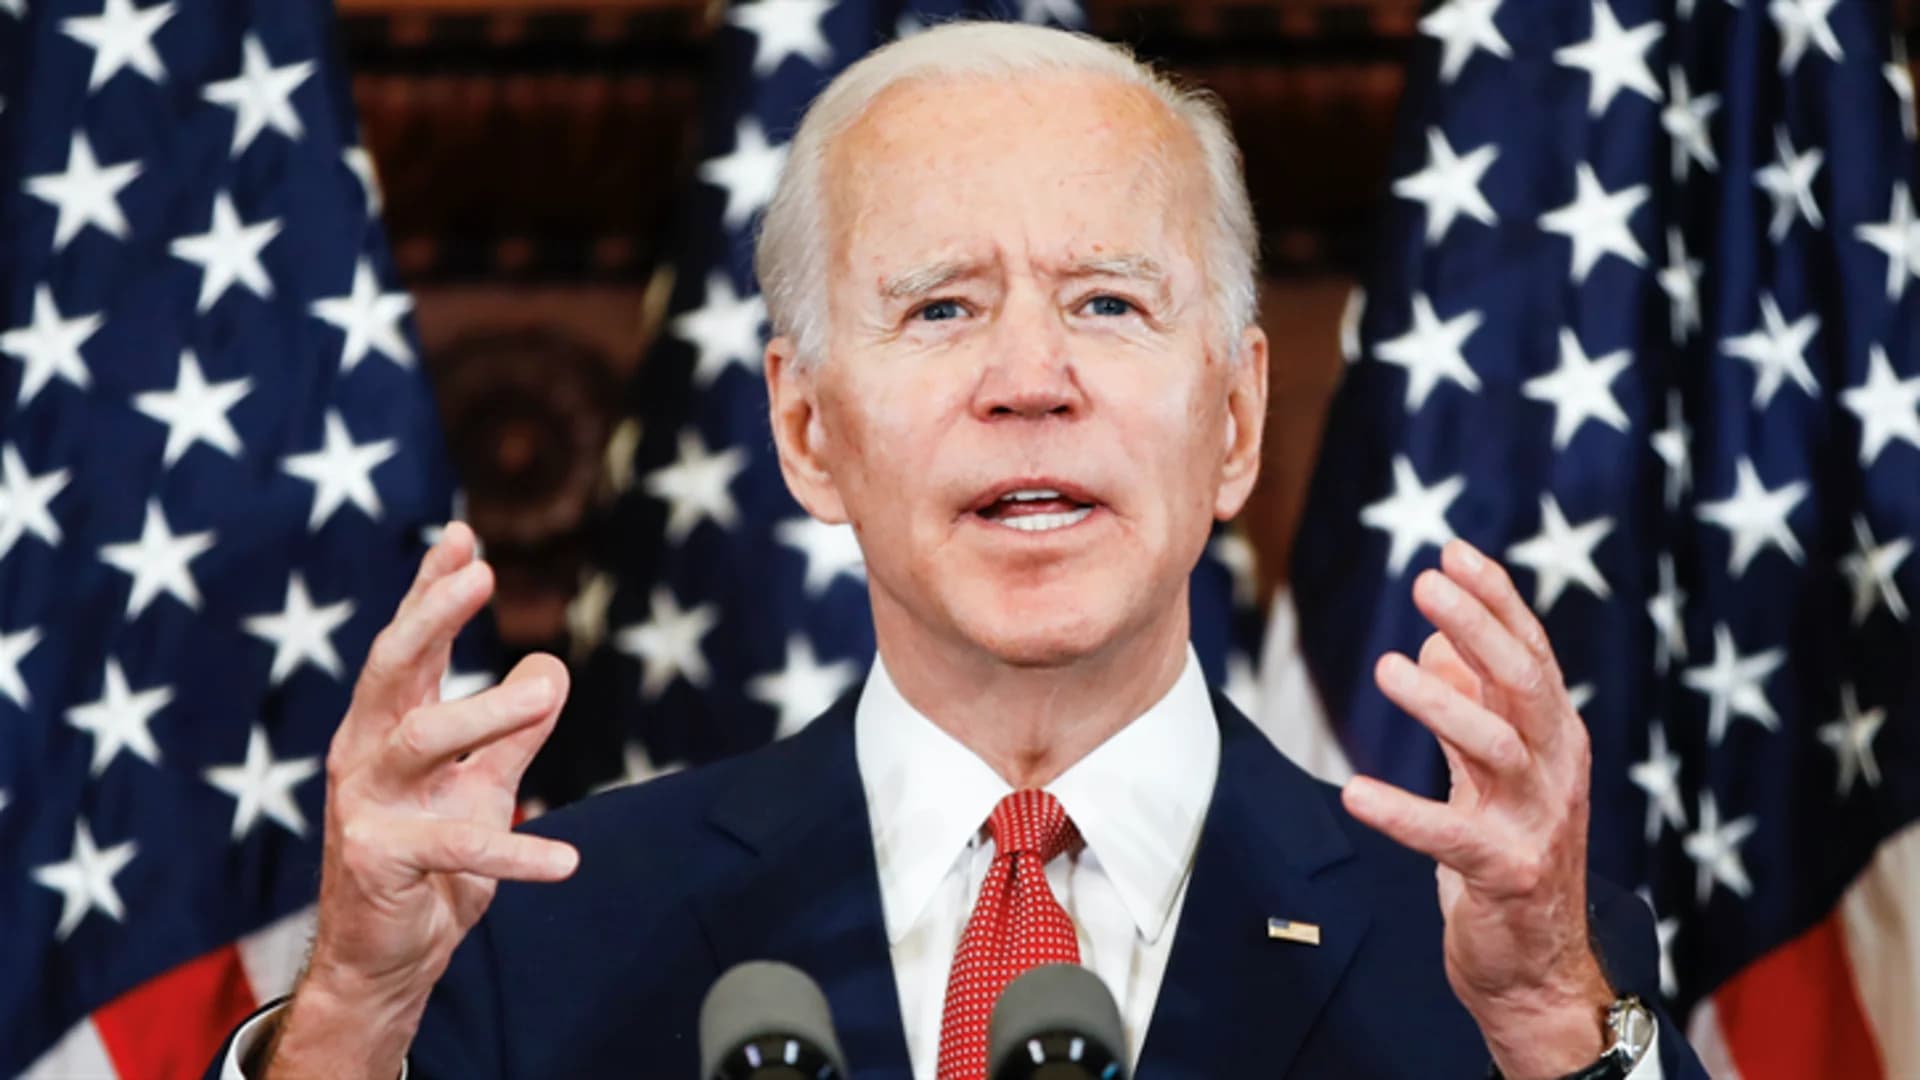 Biden: Trump 'consumed' by ego, not leading during crisis